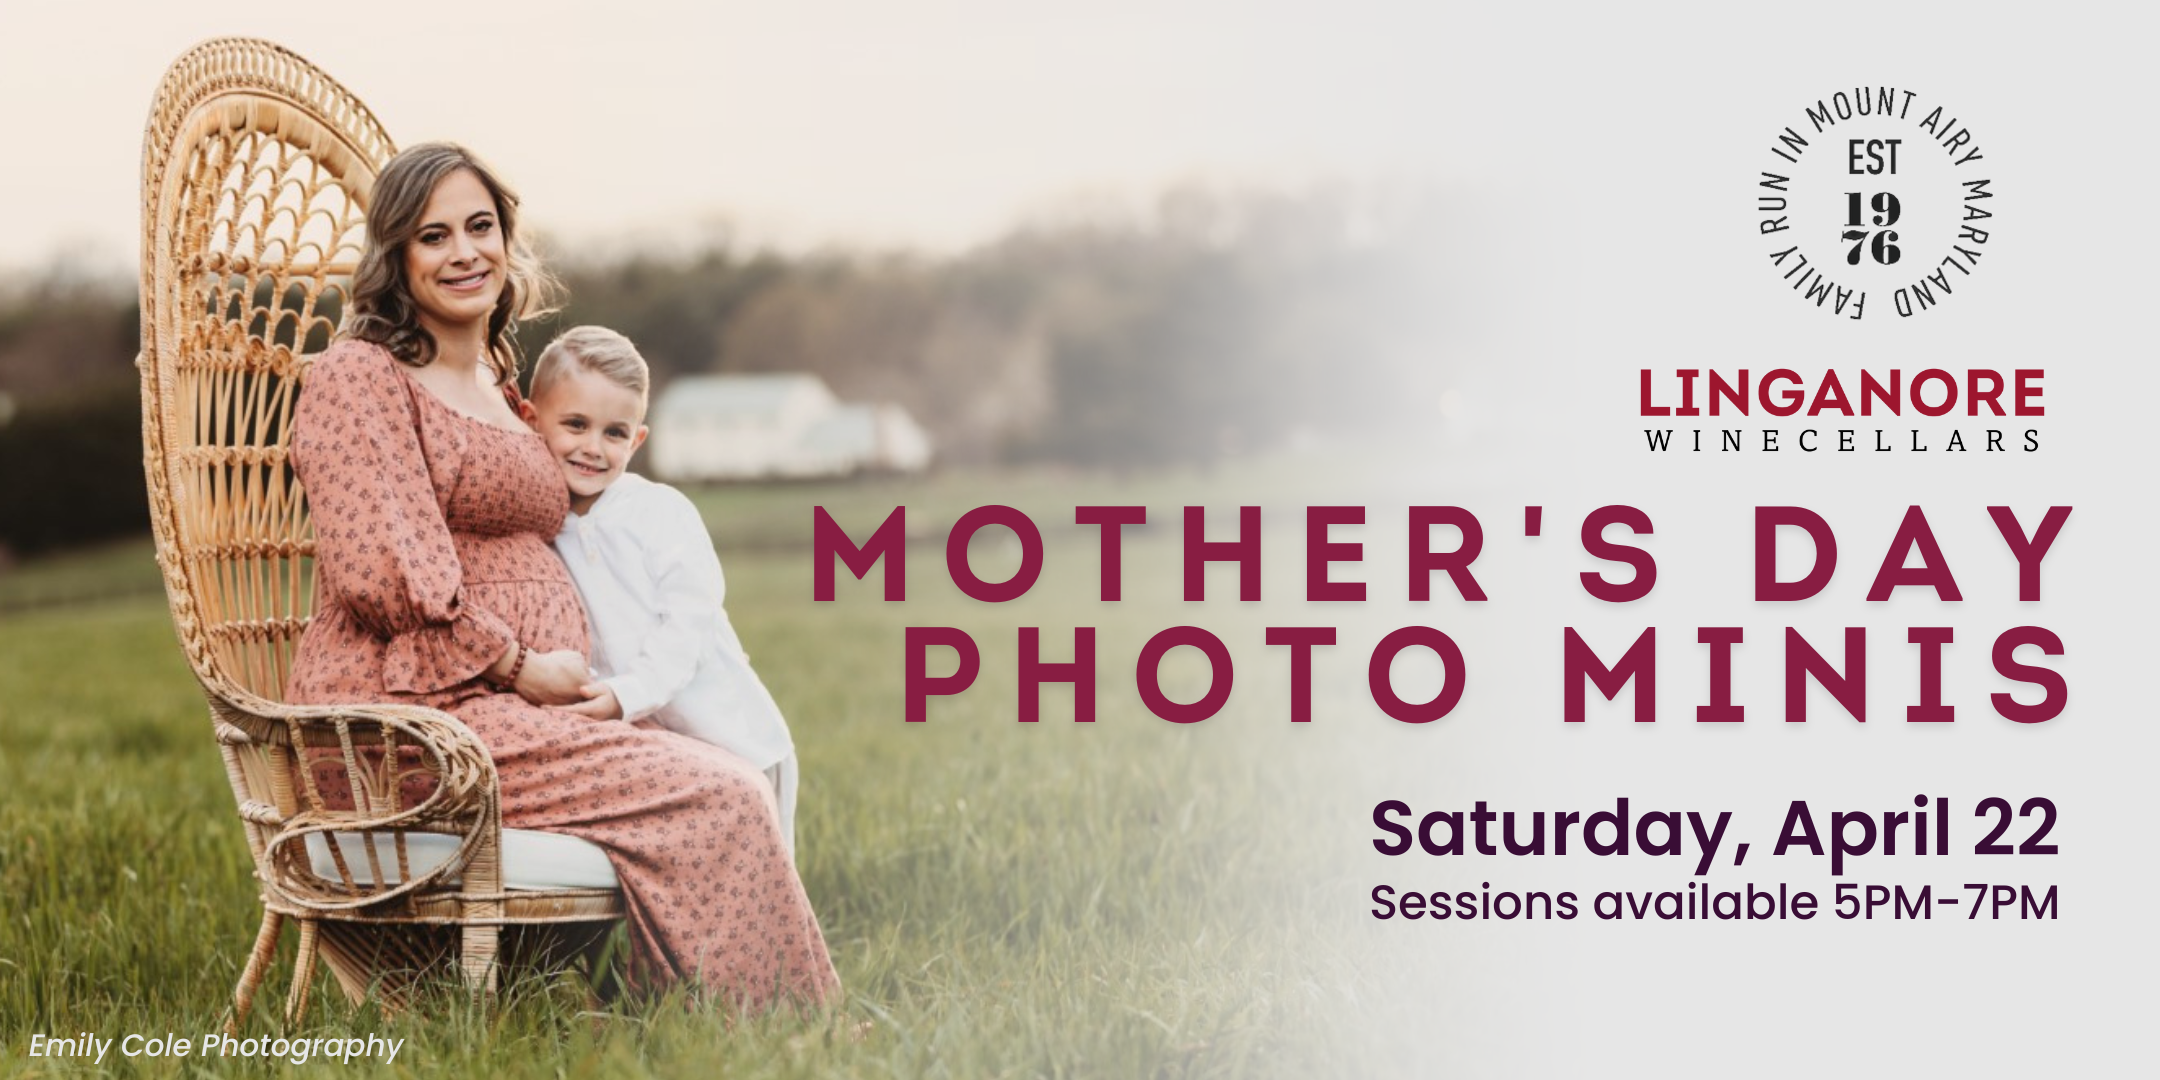 Mother's Day Photo Minis - Linganore Wines